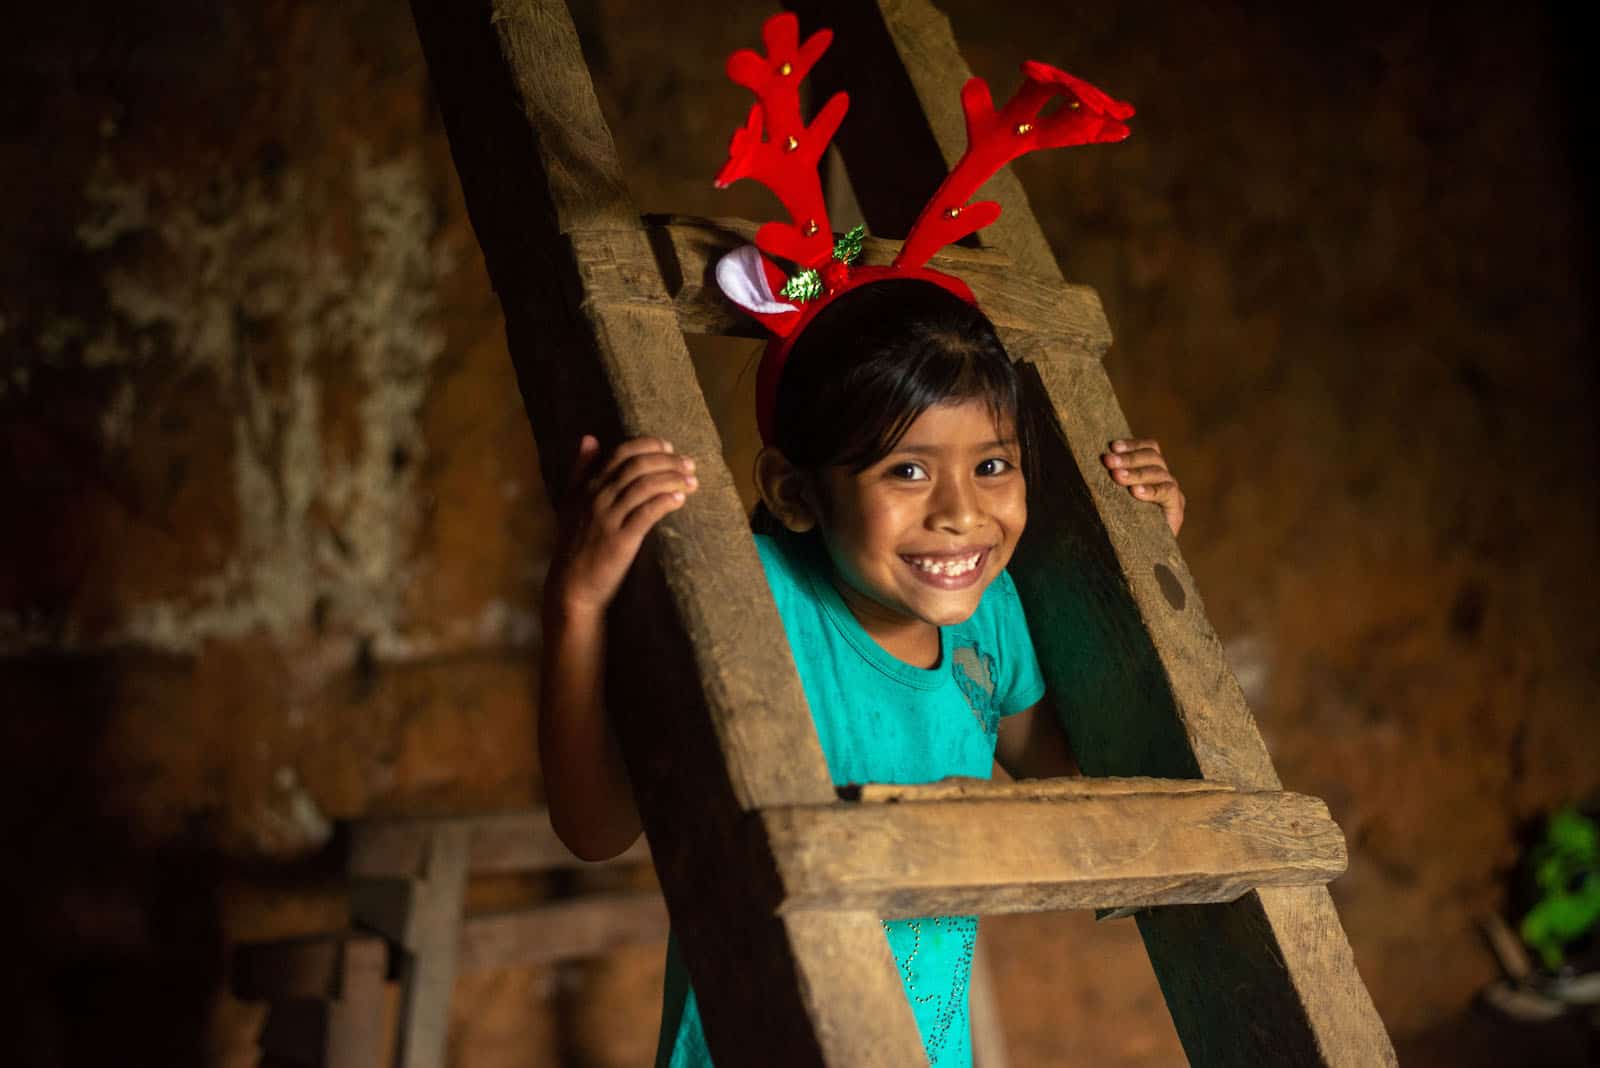 A girl wearing a green shirt and reindeer horns peeks out from a wooden ladder. 